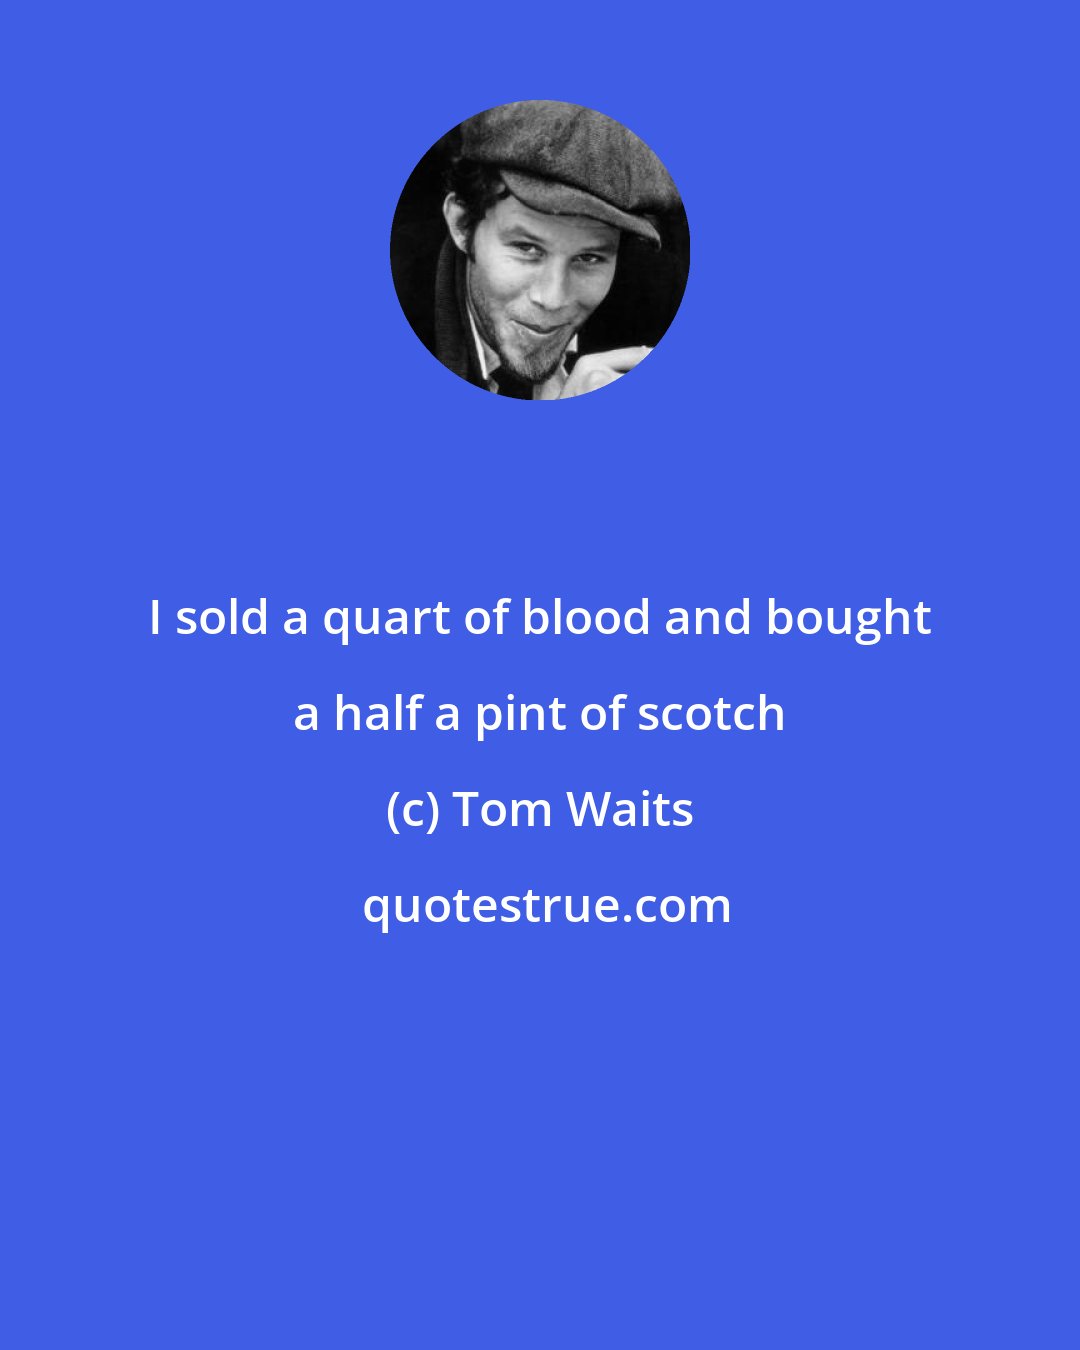 Tom Waits: I sold a quart of blood and bought a half a pint of scotch